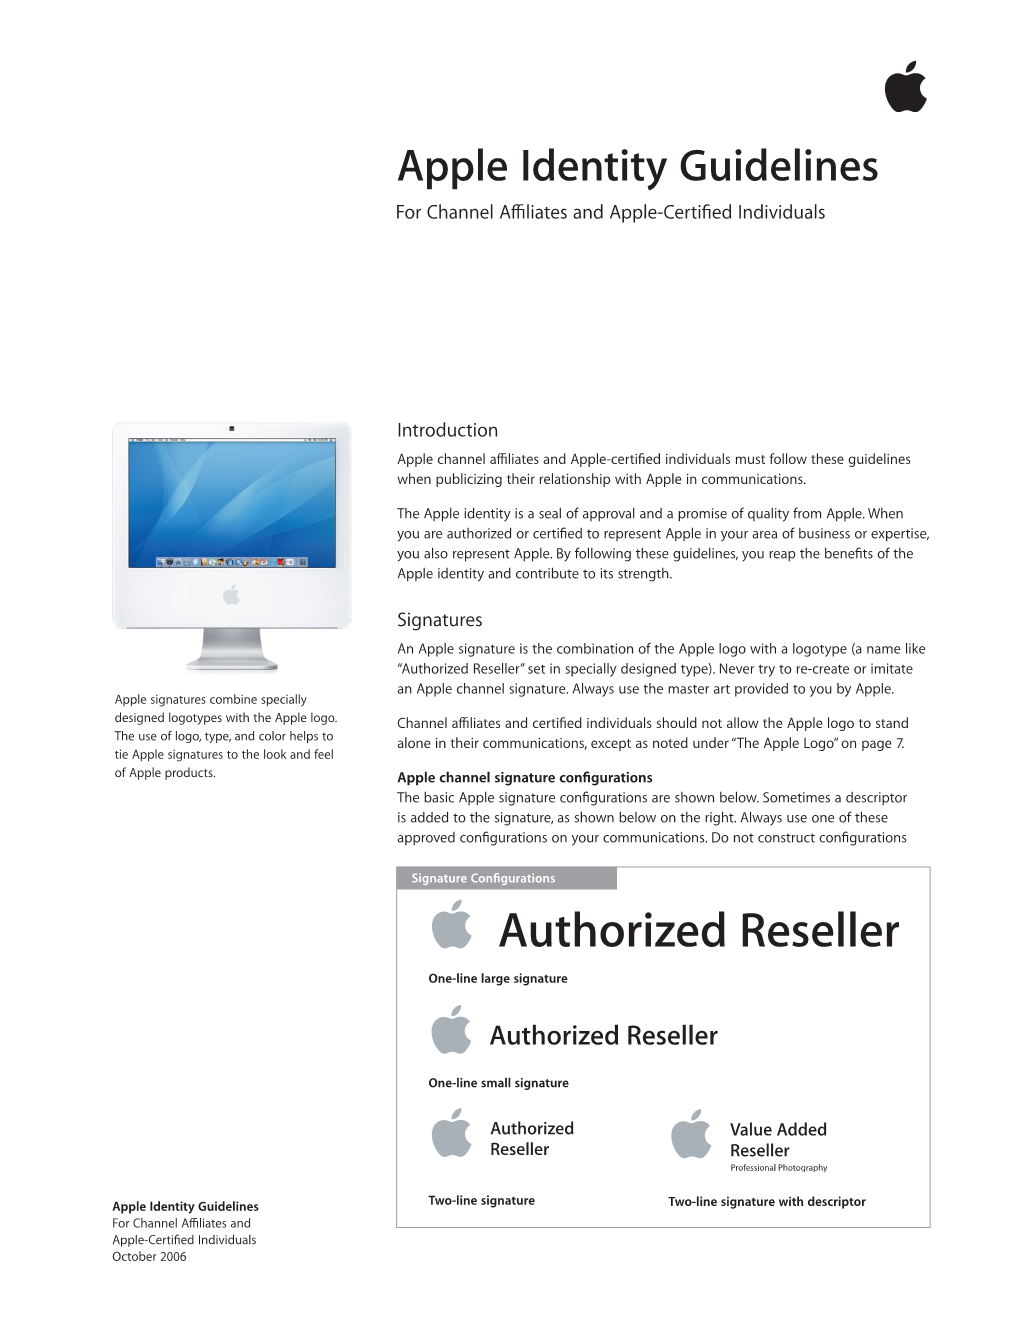 Apple Identity Guidelines for Channel A∑Liates and Apple-Certiﬁed Individuals